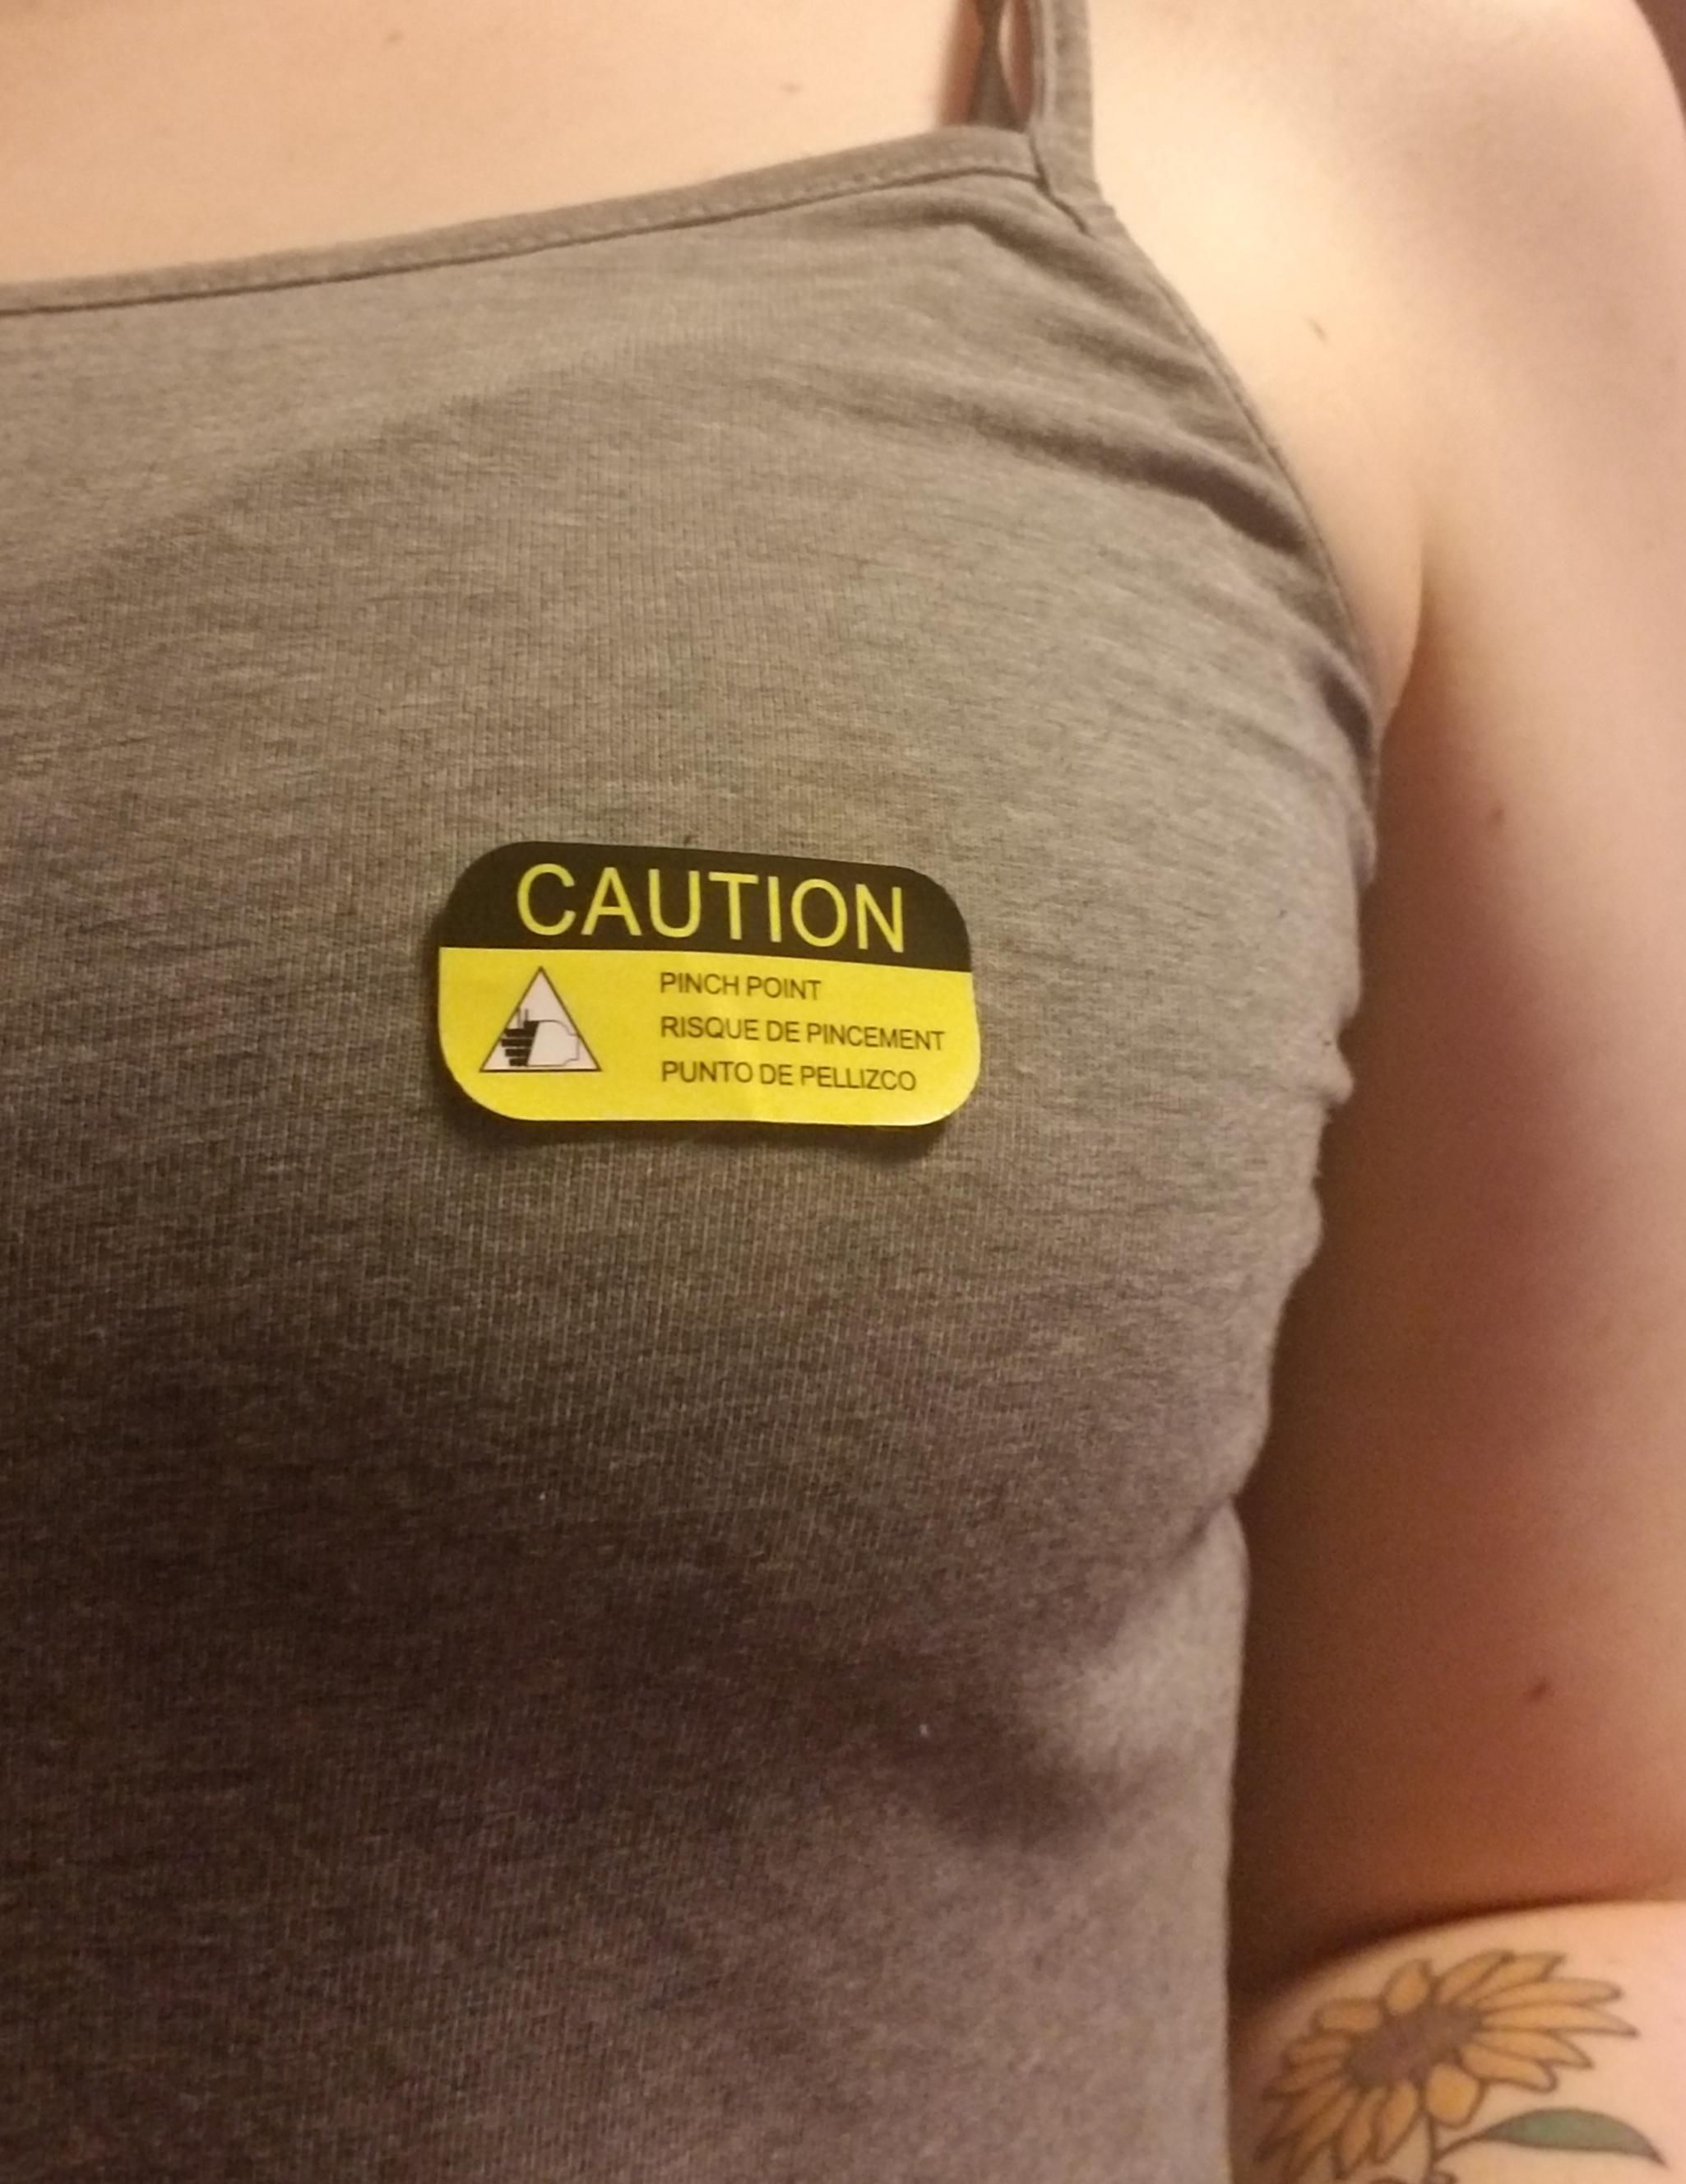 Boyfriend stuck this on and thought it was hilarious